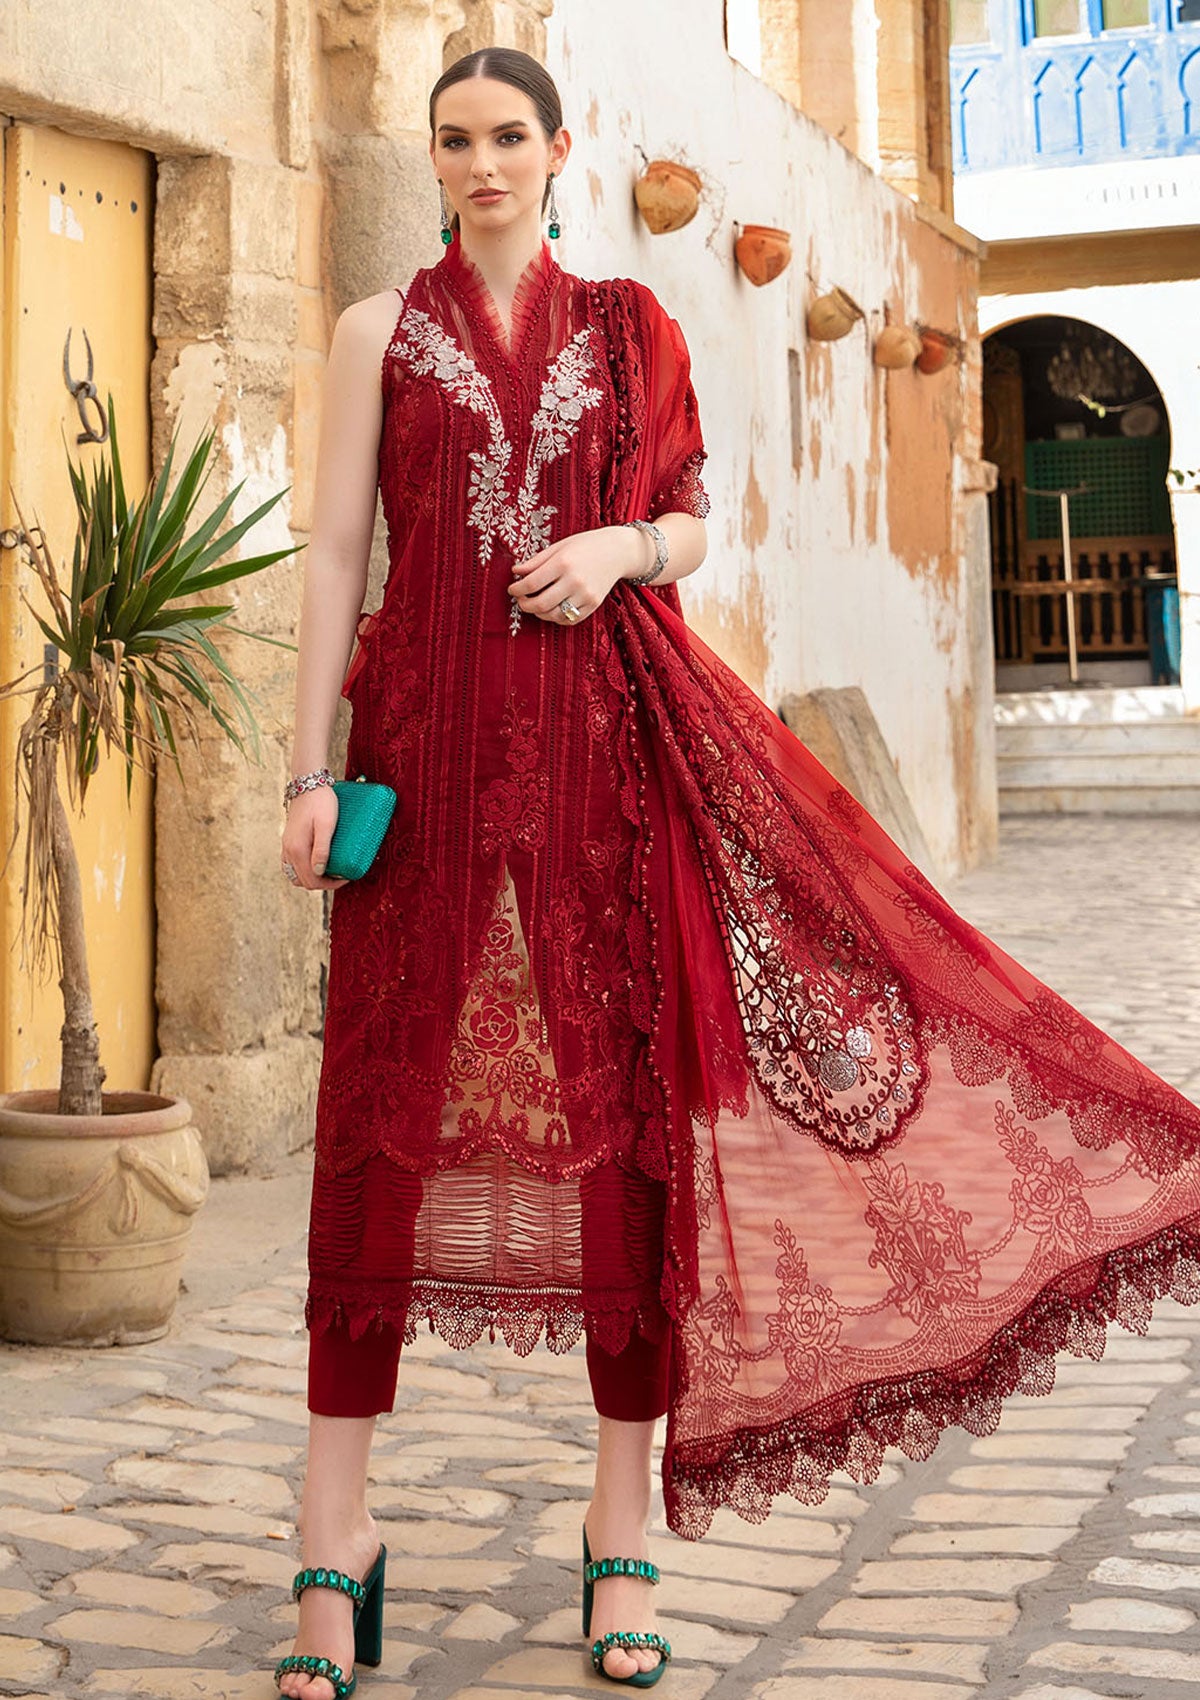 Lawn Collection - Maria B - Voyage a'Luxe - Luxury - MB24#01B